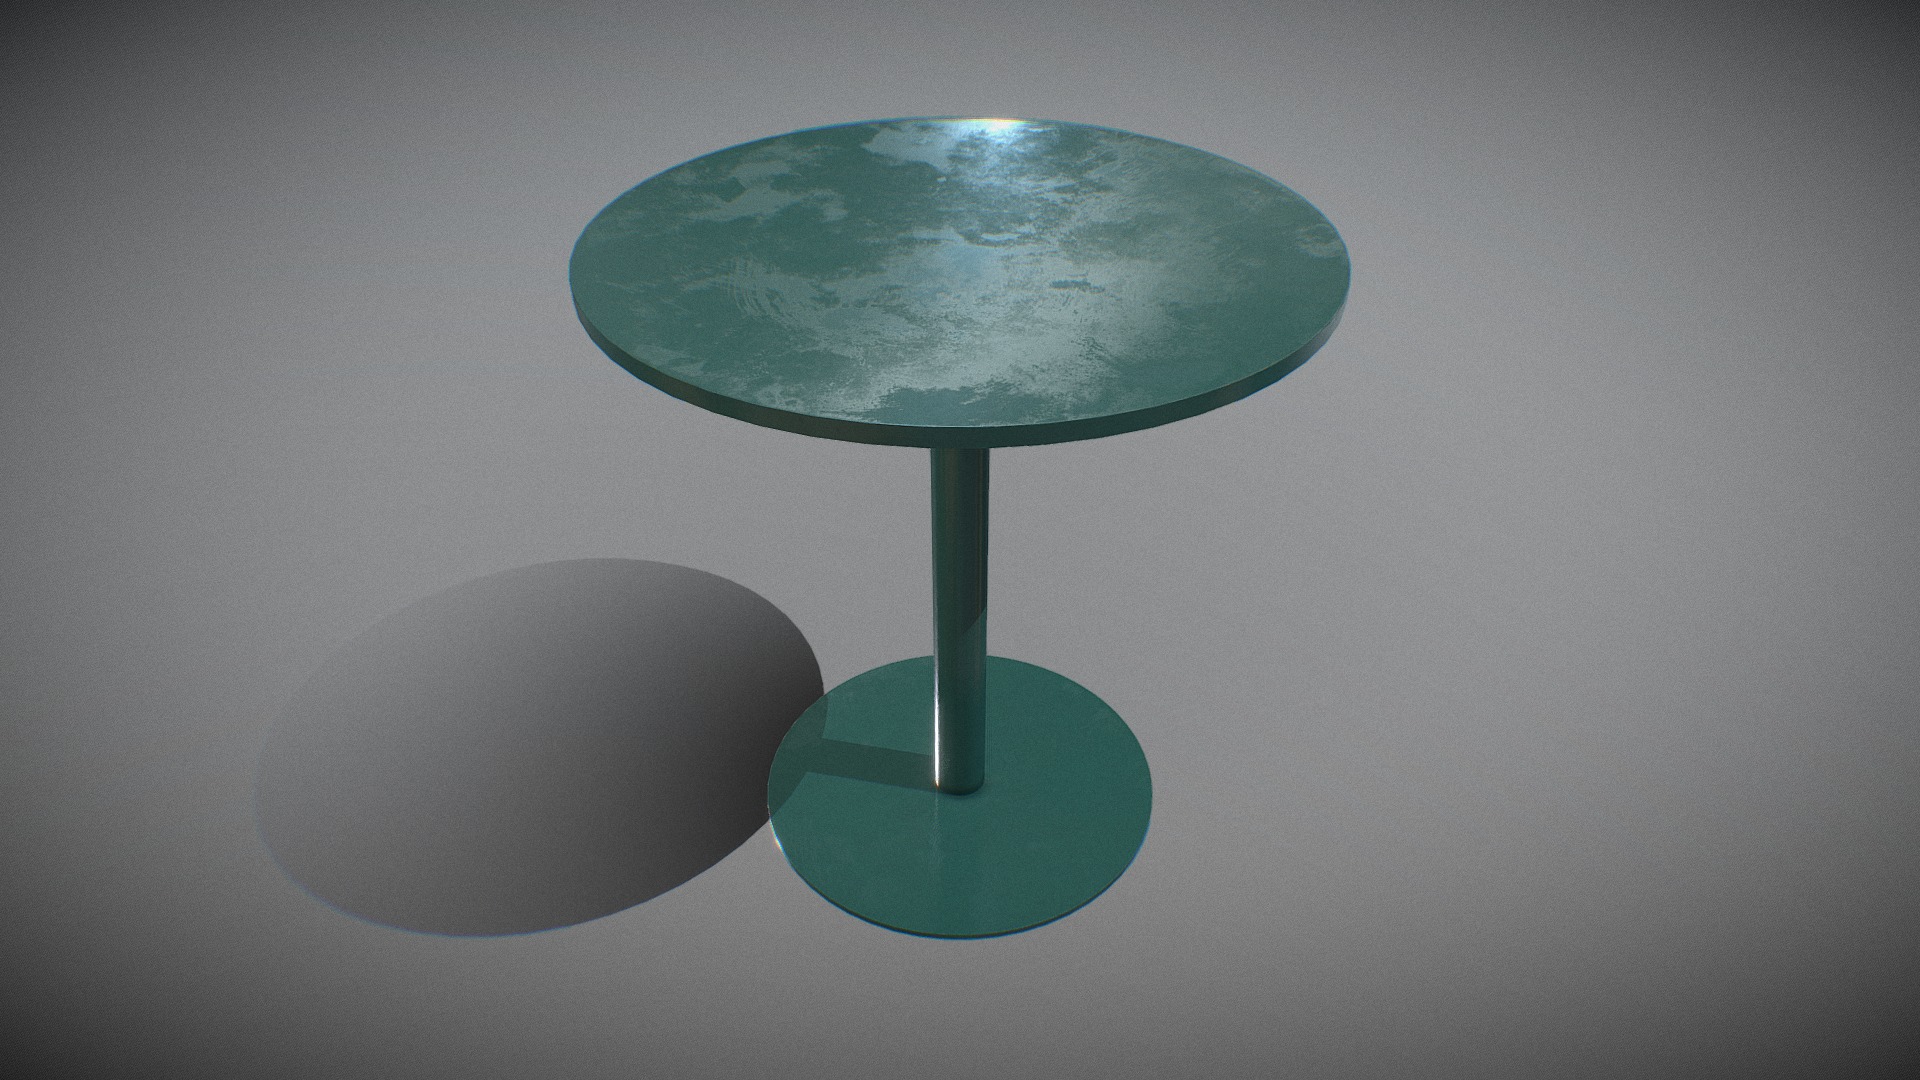 3D model Mesa Café Table – Model 4670 V-01 - This is a 3D model of the Mesa Café Table - Model 4670 V-01. The 3D model is about a round green object with a round top.